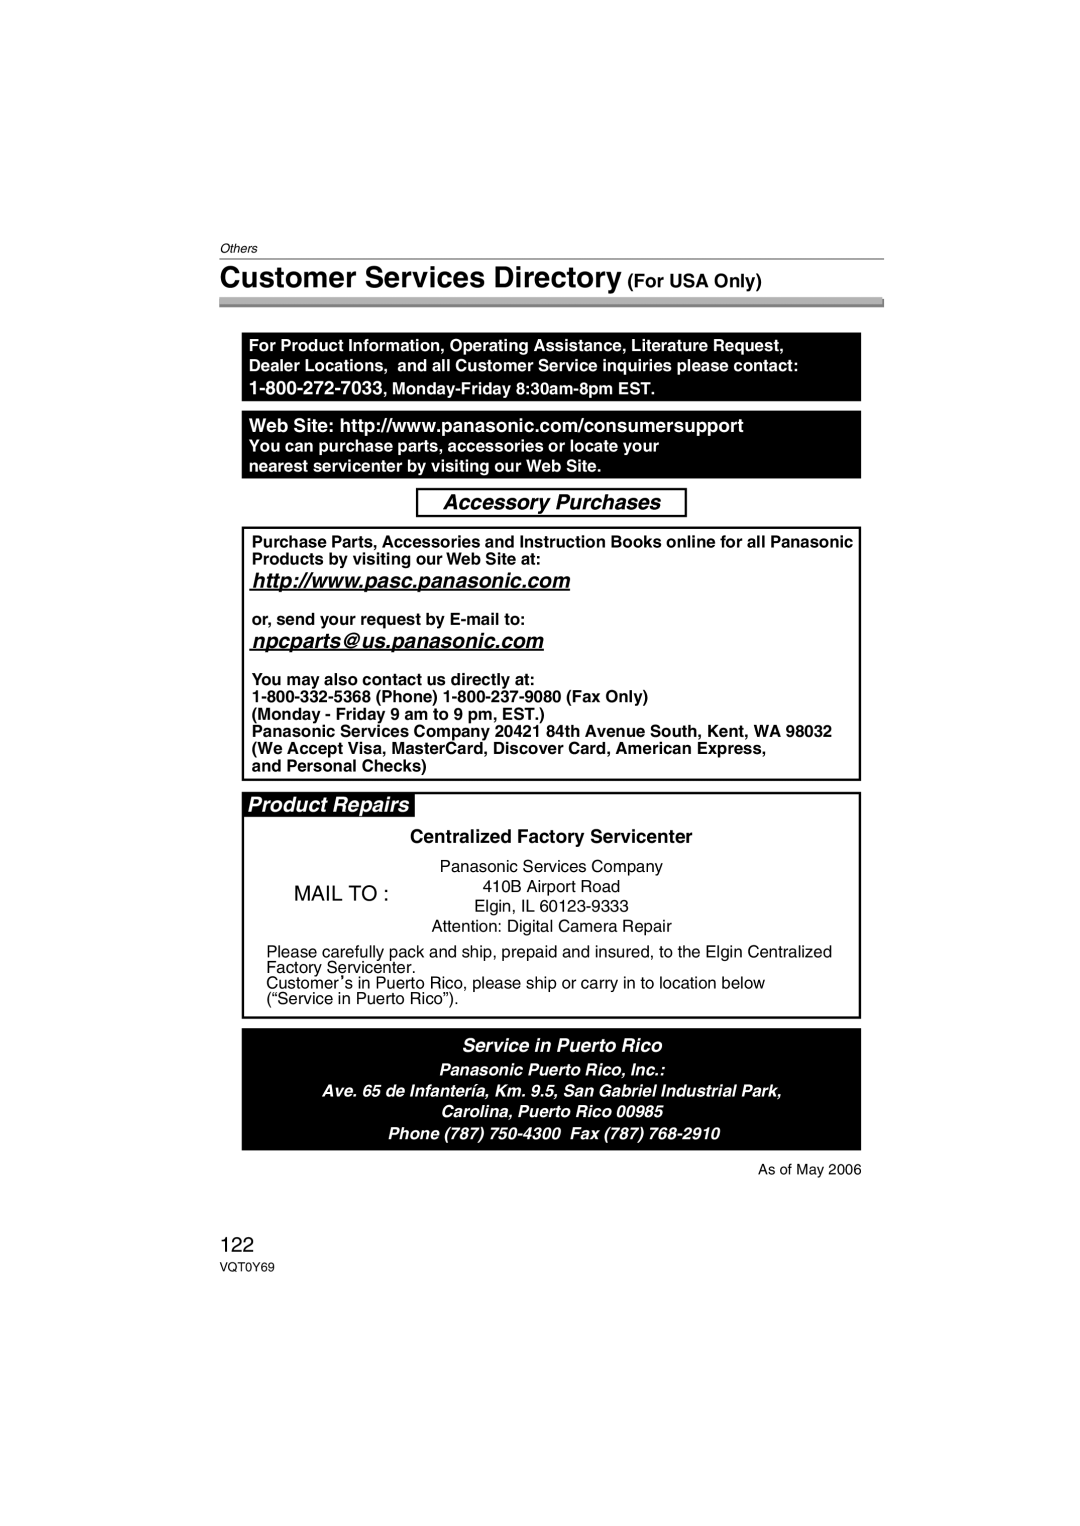 Panasonic DMC-FX07 Customer Services Directory For USA Only, Mail To, Centralized Factory Servicenter, Accessory Purchases 